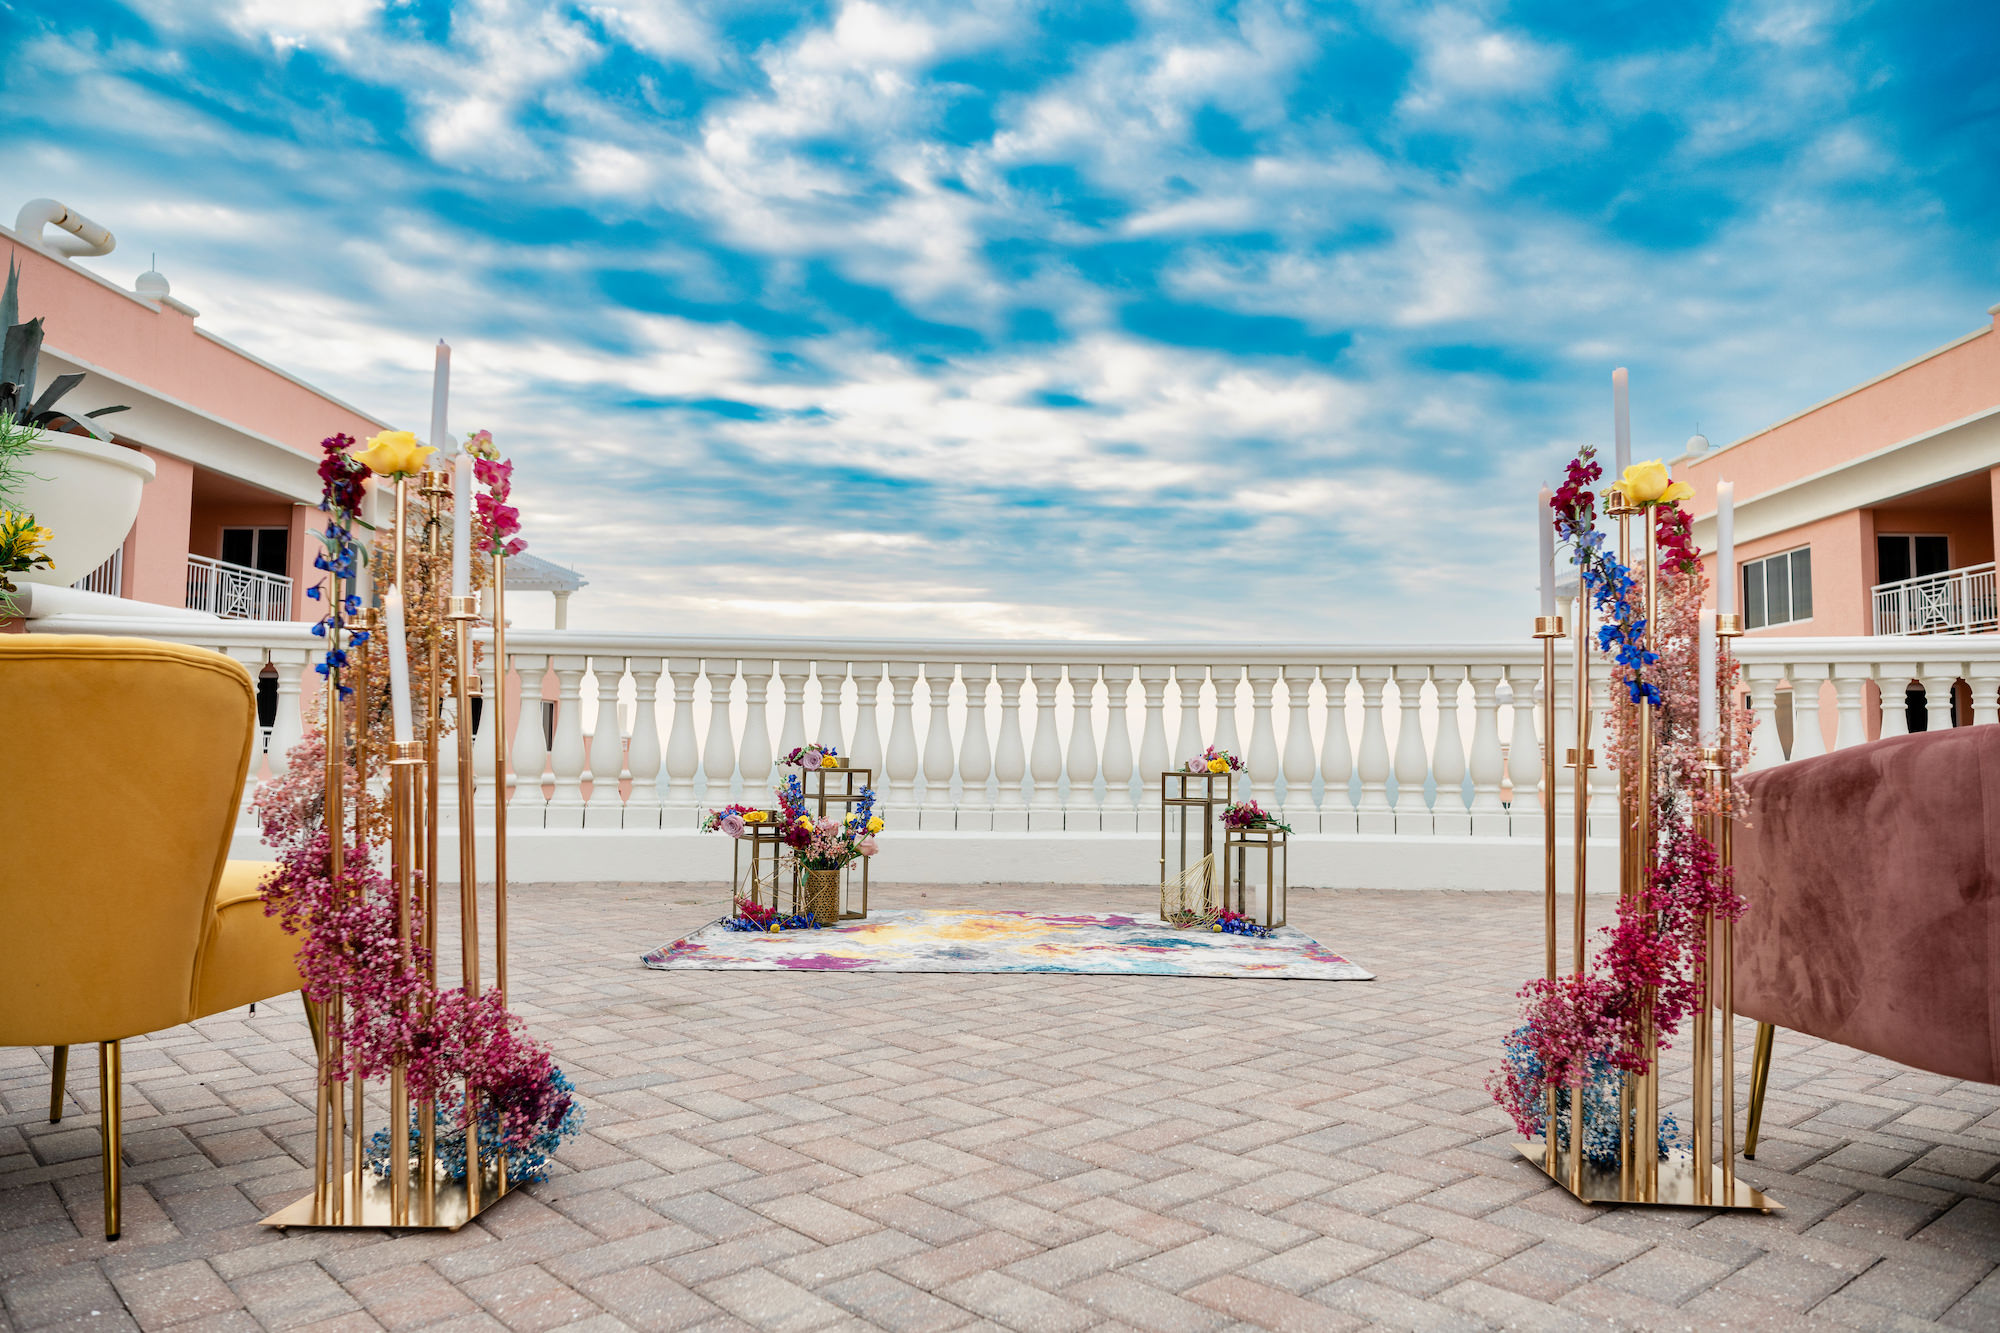 Vibrant Pink Baby's Breath, Blue and Red Snapdragon | Gold Cluster Taper Candle Holder Ceremony Aisle Decor | Tampa Bay Florist Save the Date Florida